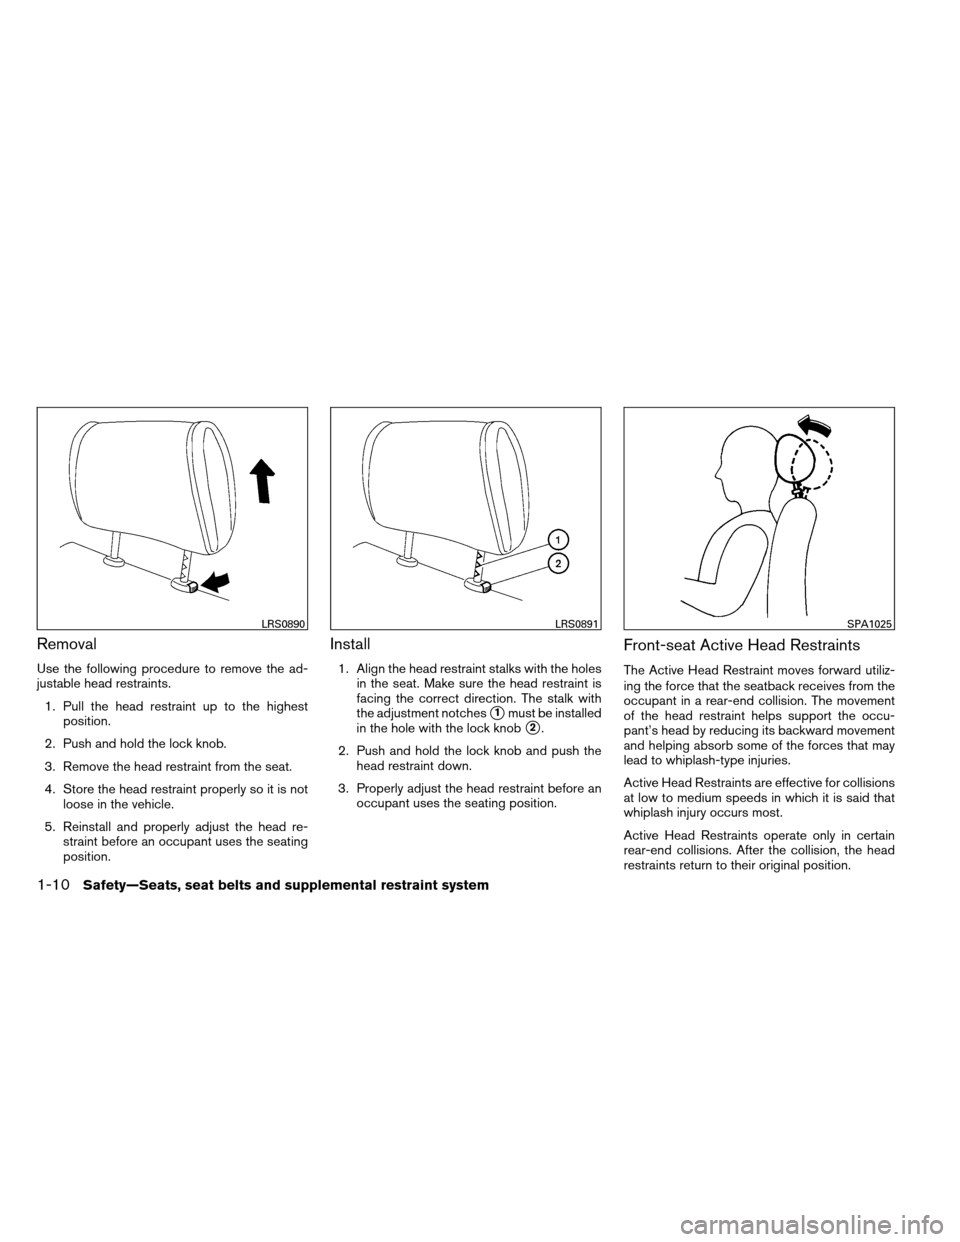 NISSAN ARMADA 2013 1.G Owners Manual Removal
Use the following procedure to remove the ad-
justable head restraints.1. Pull the head restraint up to the highest position.
2. Push and hold the lock knob.
3. Remove the head restraint from 